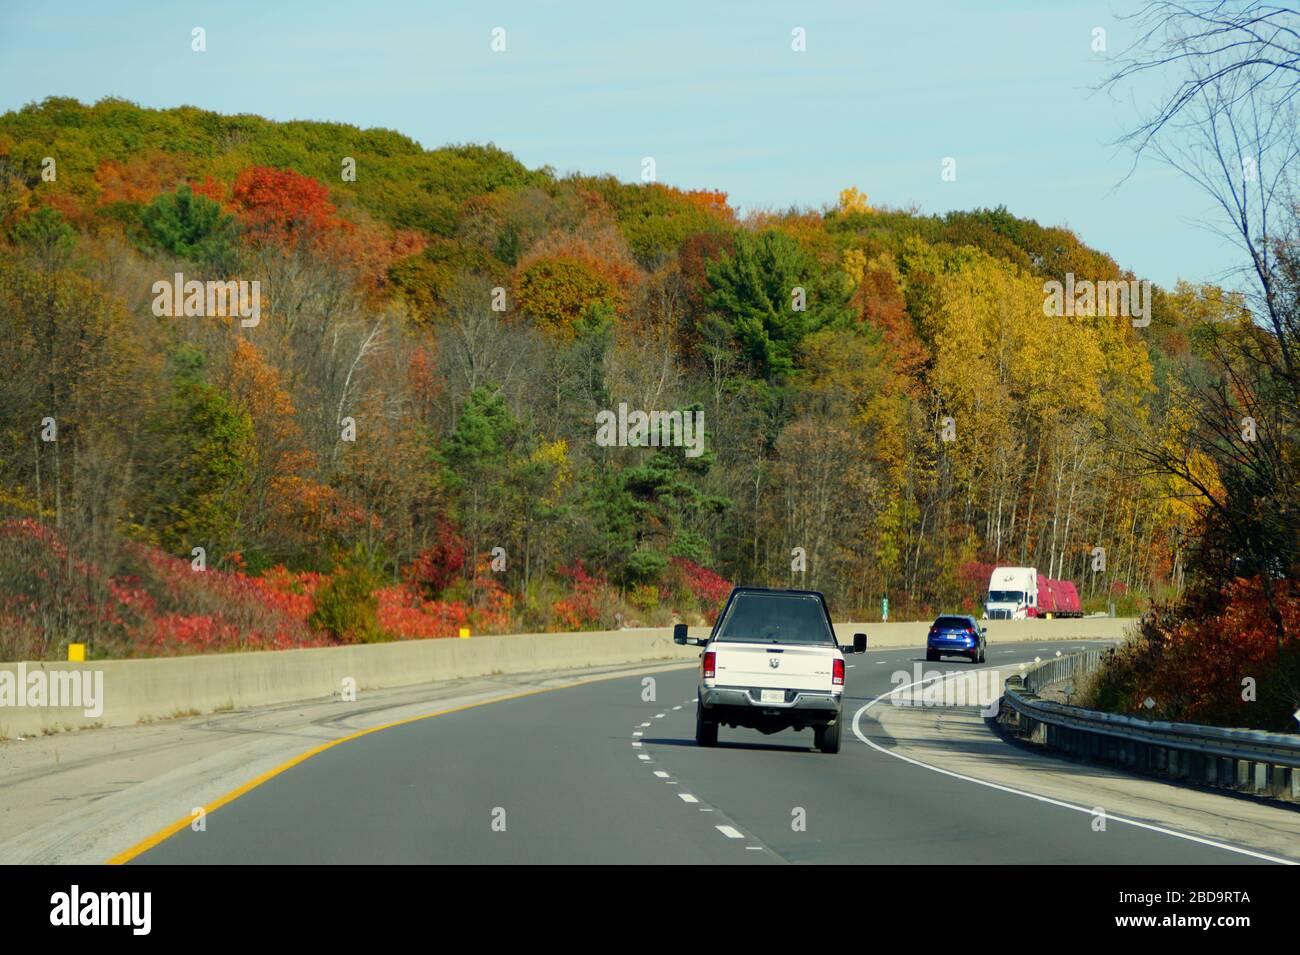 Ontario, Canada - October 28, 2019 - The view of the traffic on Route 401 highway overlooking the sunning colors of fall foliage Stock Photo